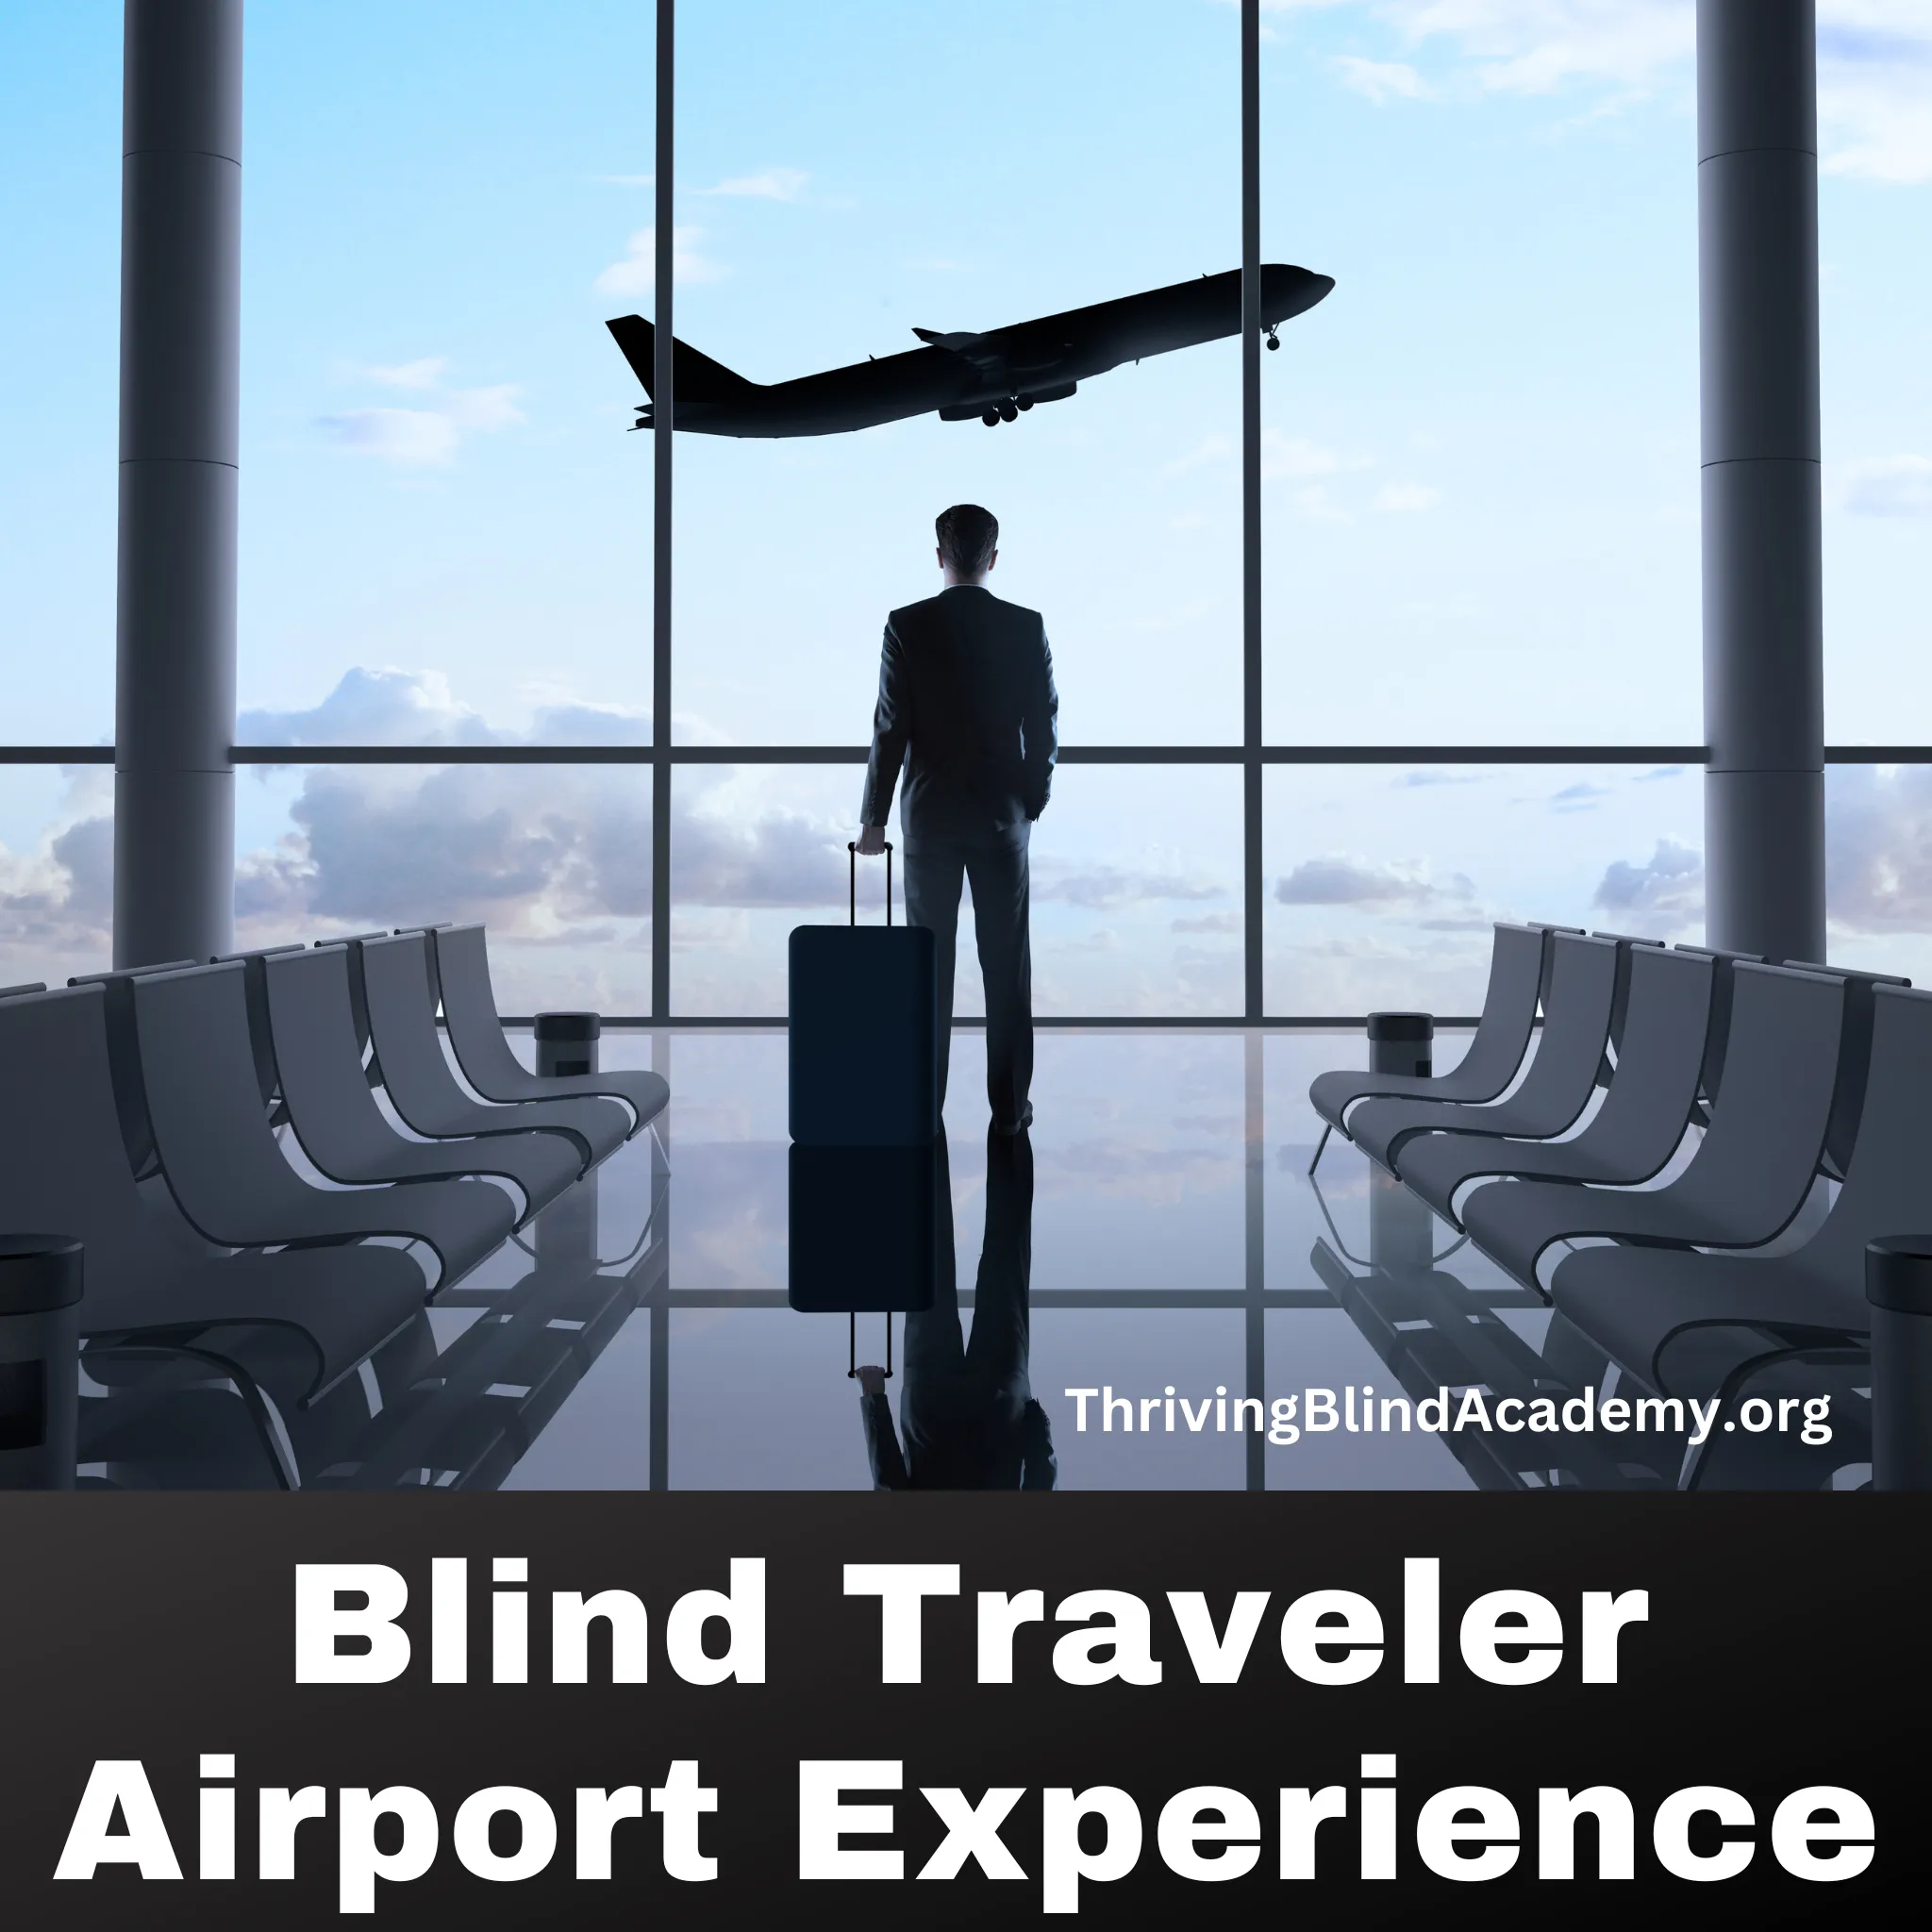 image of  a person standing in an airport loooking out the wall of windows at a plane taking off. Text reads Blind Traveler Airport Experience